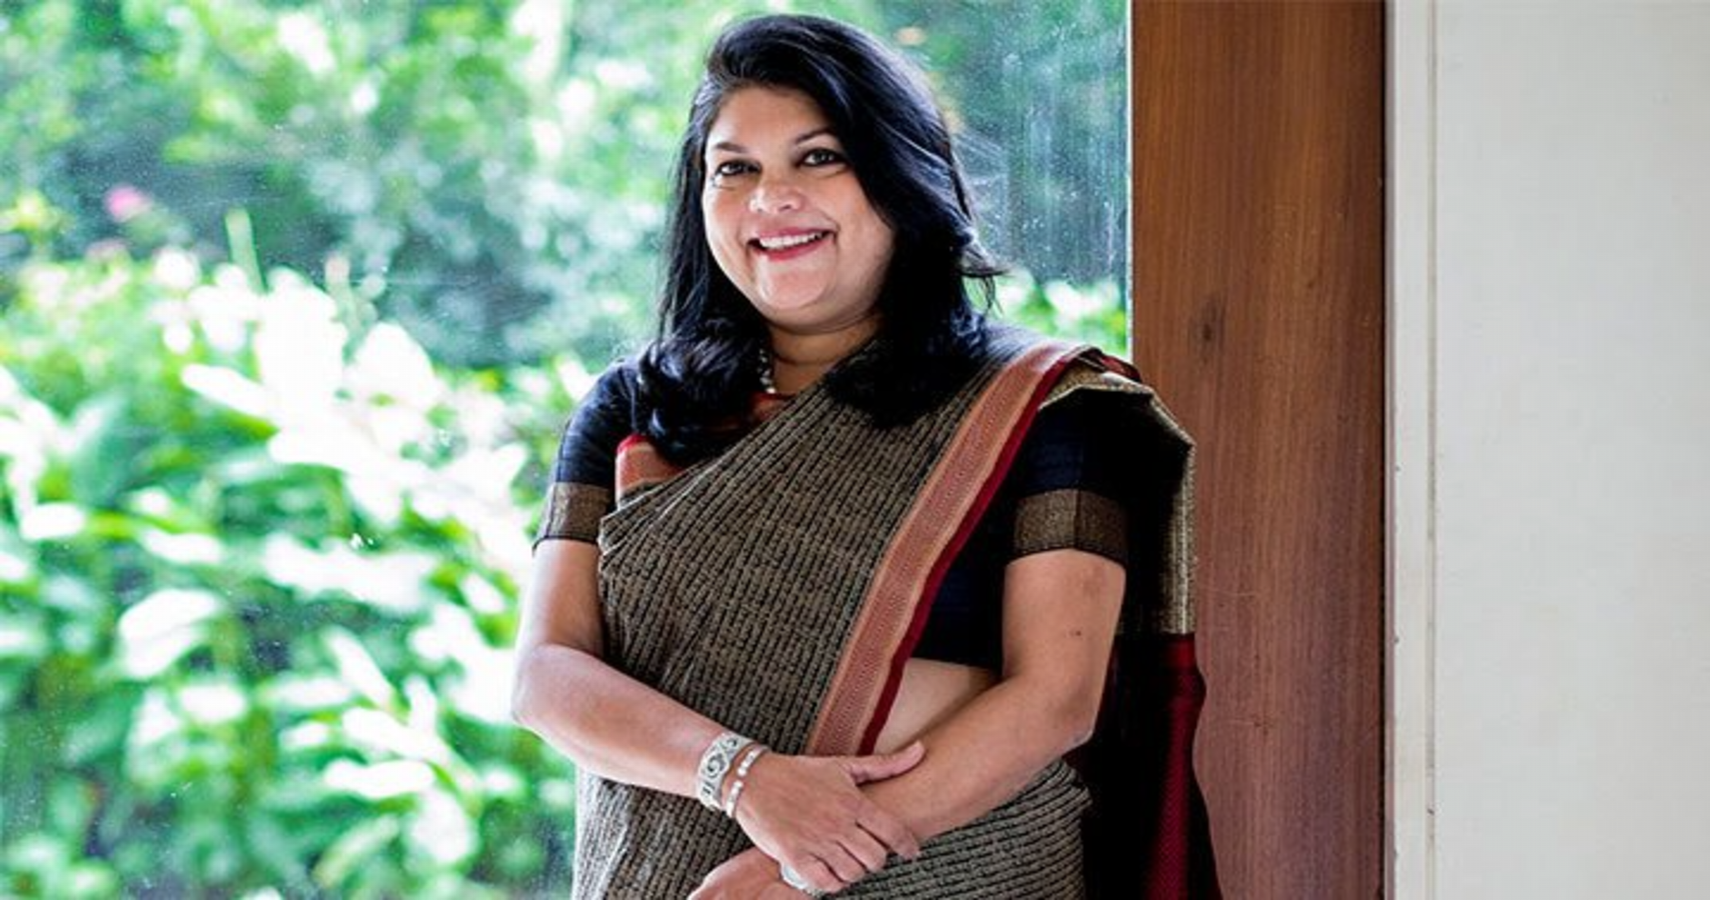 Online Retailer Founder Set To Become One Of India's Women Billionaires